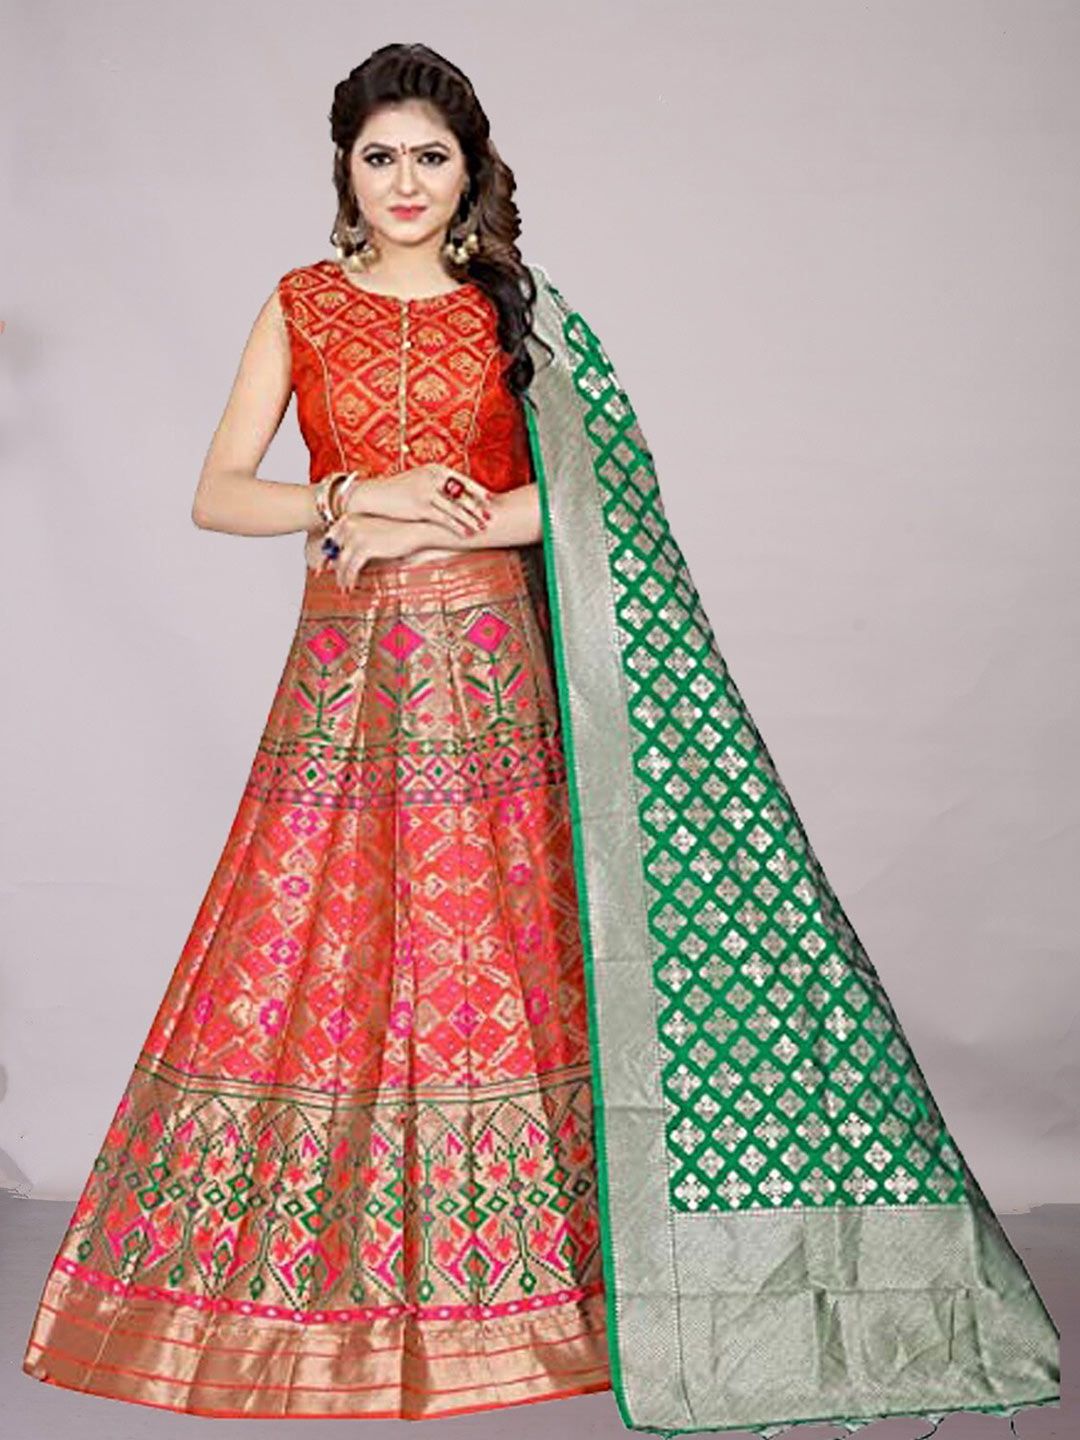 Ekta Textiles Pink And Green Semi-Stitched Lehenga And Unstitched Blouse With Dupatta Price in India